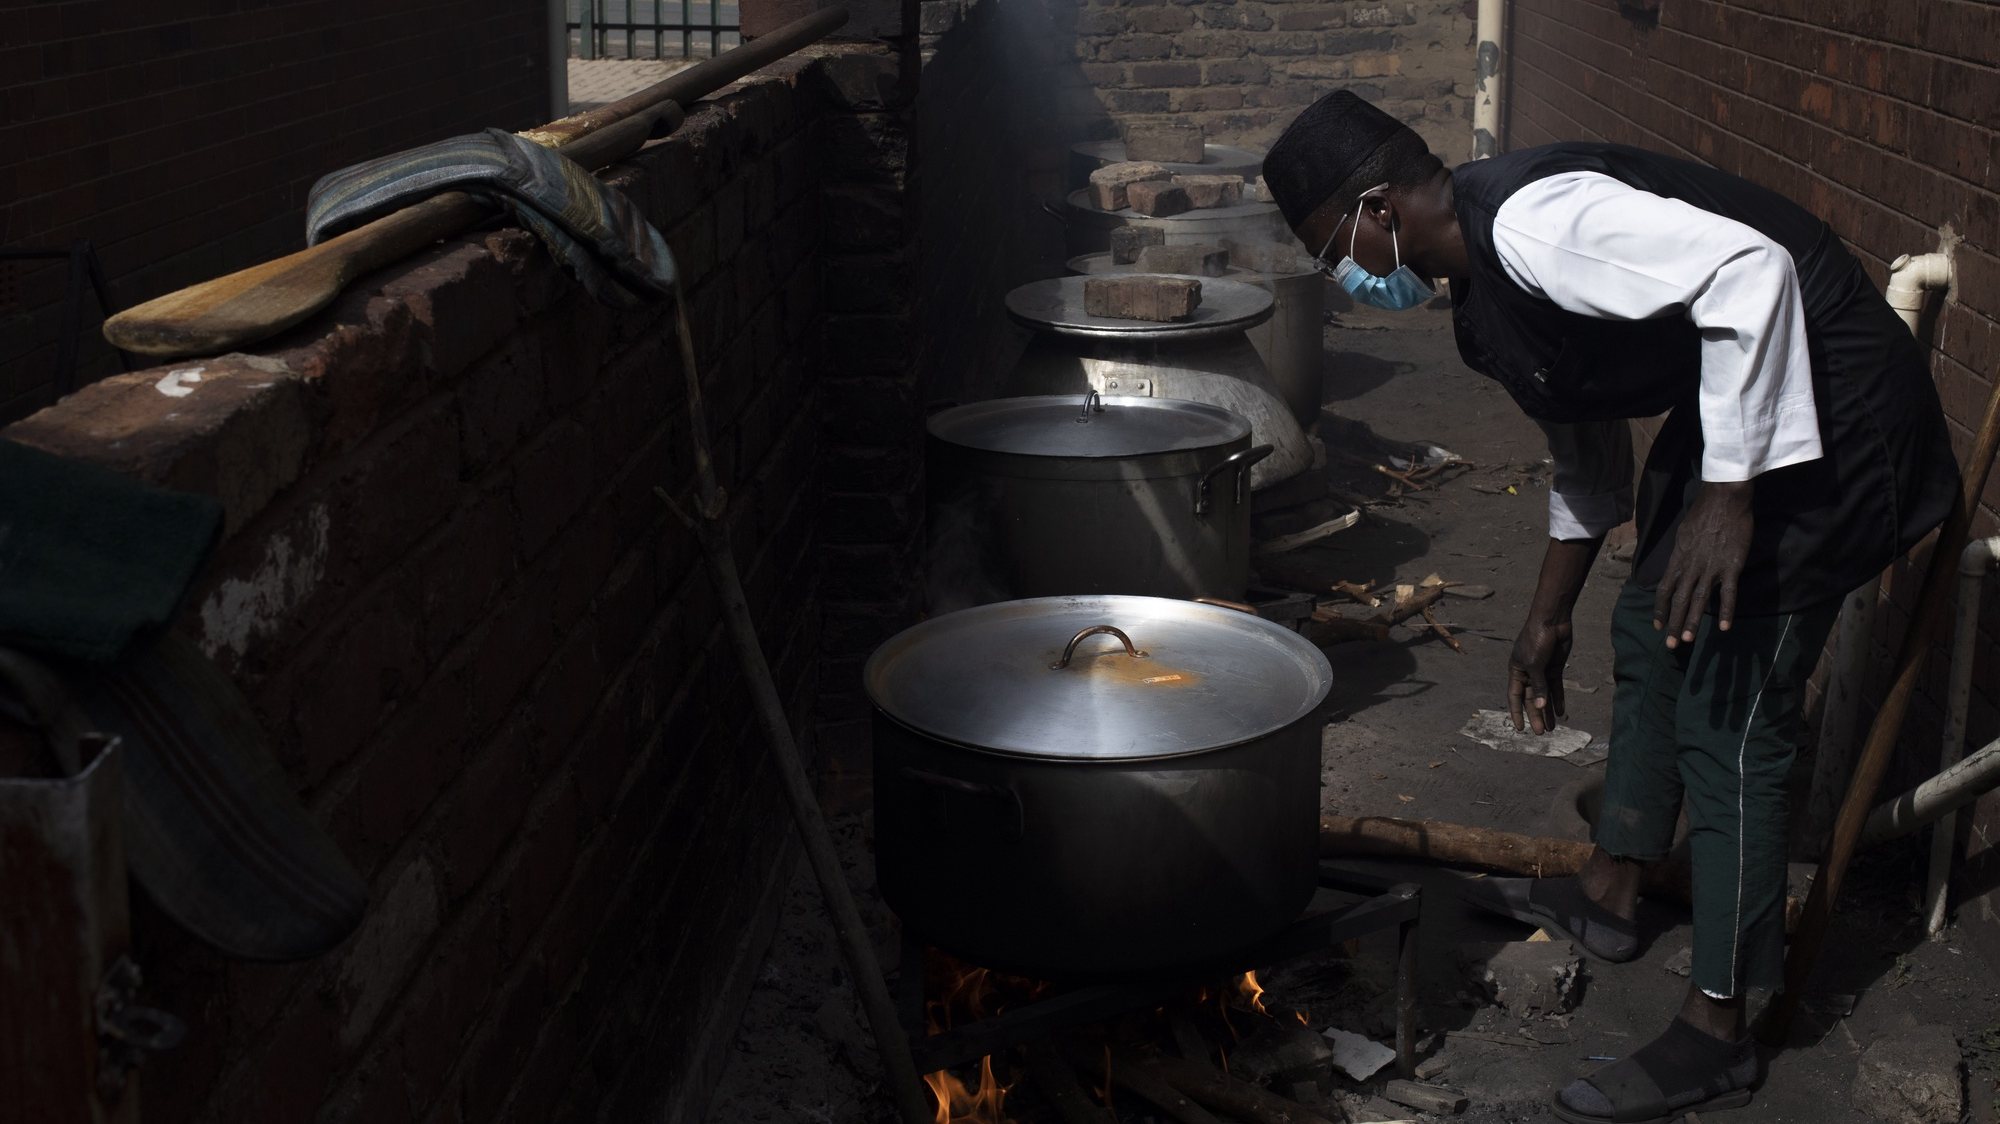 epa08431773 A member of the &#039;Hunger has no religion group&#039; prepares food for a food handout in Carination, on day 53 of the national lockdown as a result of Covid-19 Coronavirus, in Johannesburg, South Africa, 19 May 2020. The origination feeds 1,500 people per day for six days a week. Food insecurity is one of the main issues facing the country since the start of lockdown. The country is at level 4 of the national lockdown in its 46 day after it was implemented on 30 April 2020.  EPA/KIM LUDBROOK